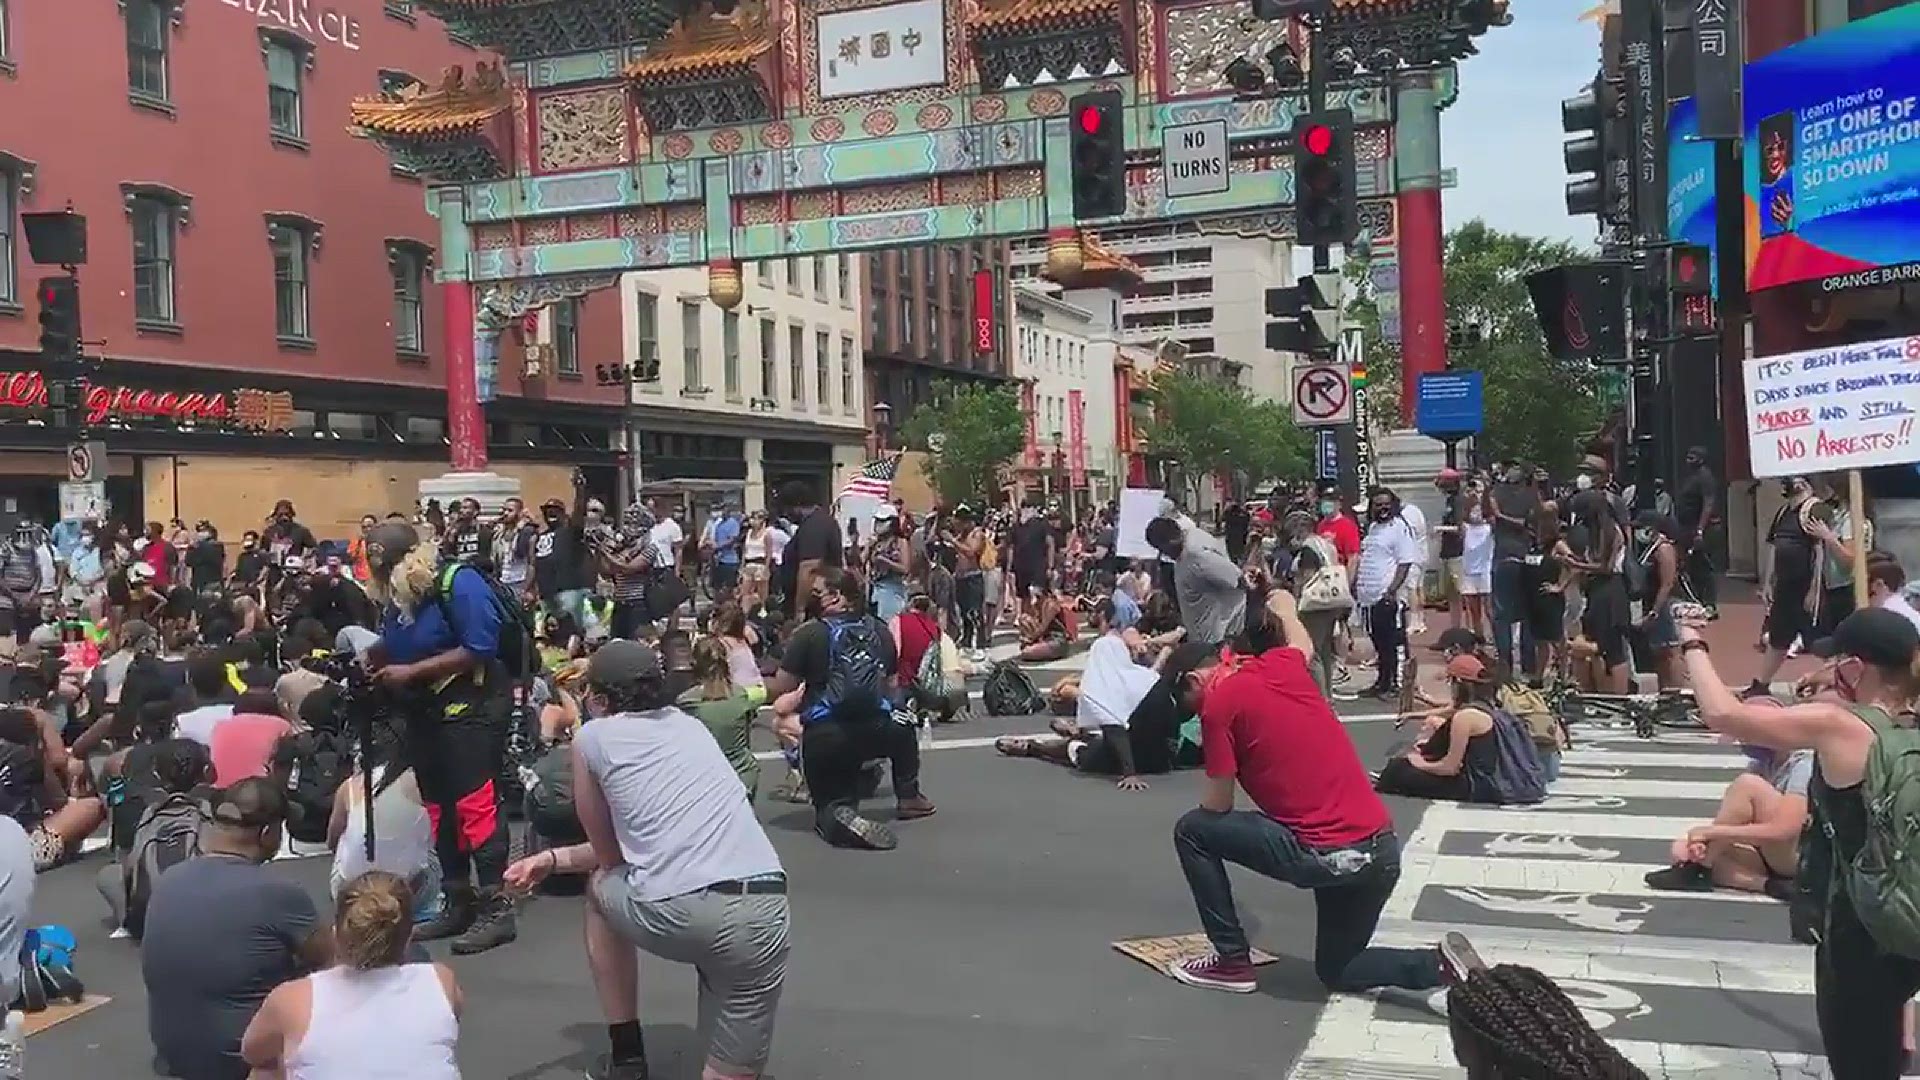 Washington, D.C. protesters took a knee for 8 minutes and 46 seconds in honor of George Floyd. That's the amount time police had his knee on FLoyd's neck.